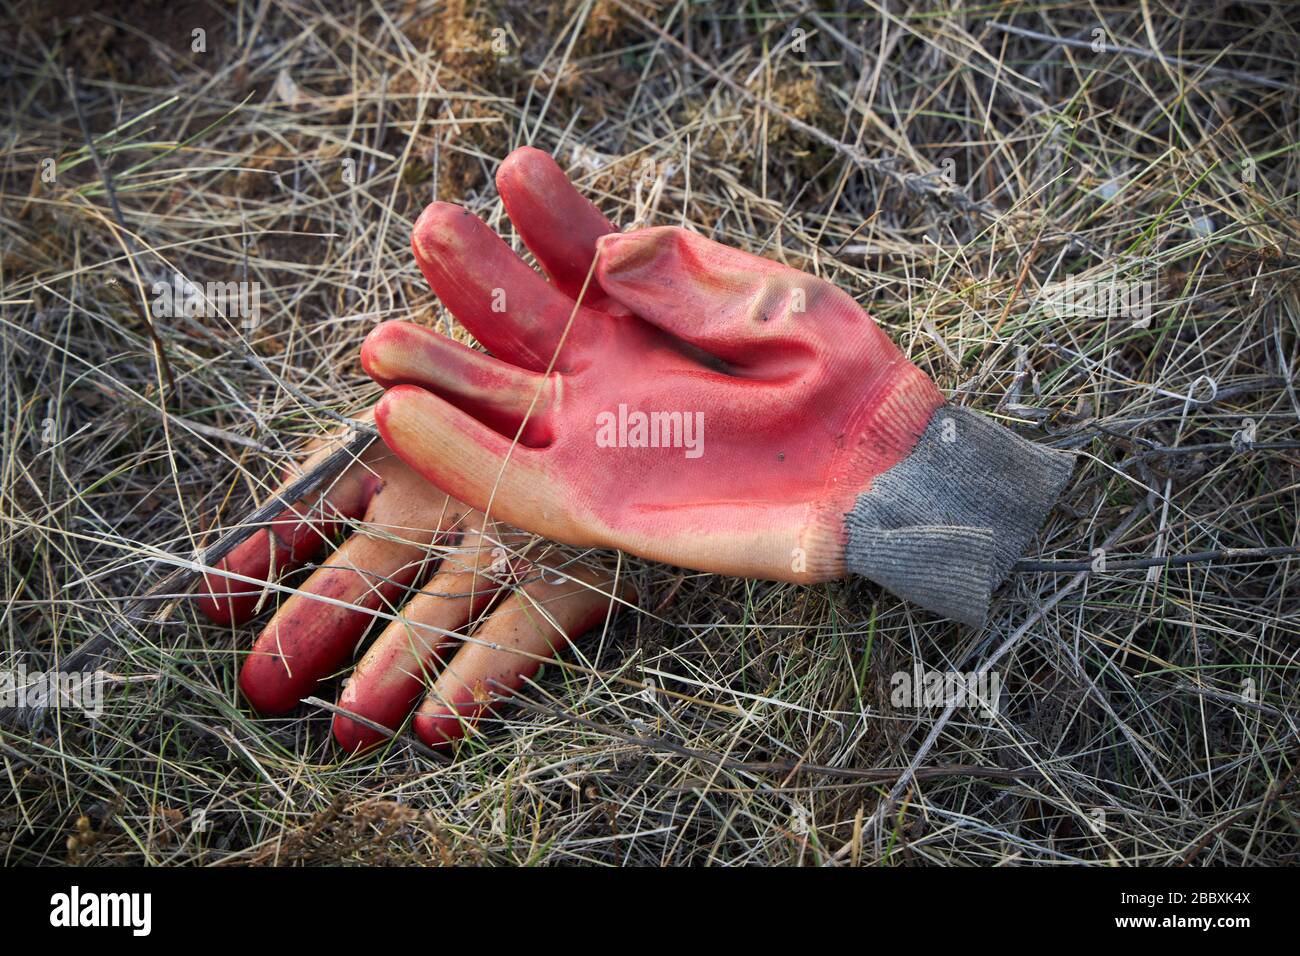 Pair of old rubber gloves lies on dry grass. Stock Photo